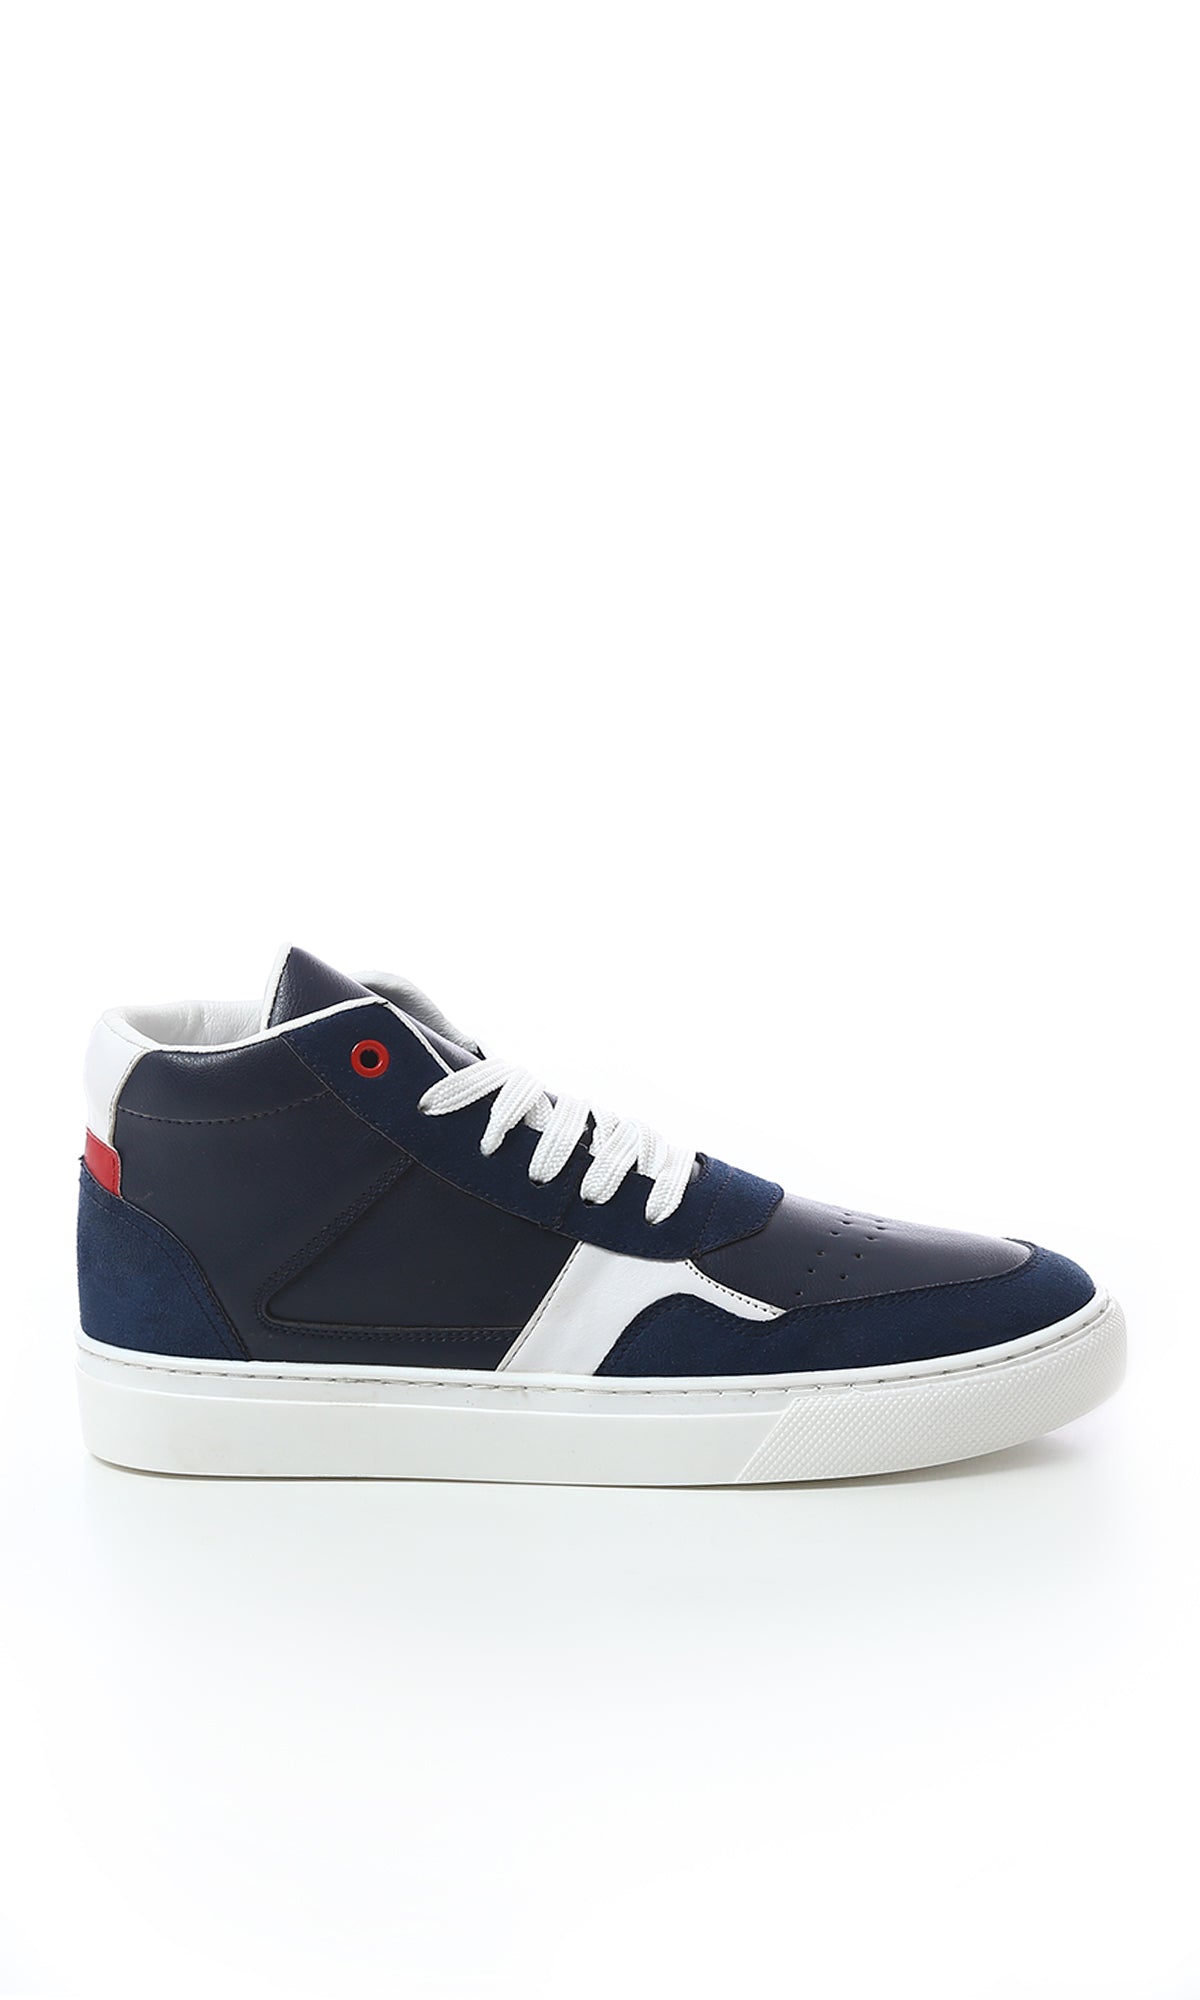 O180407 Lace Up Leather With Suede High-Neck Casual Shoes - Navy Blue